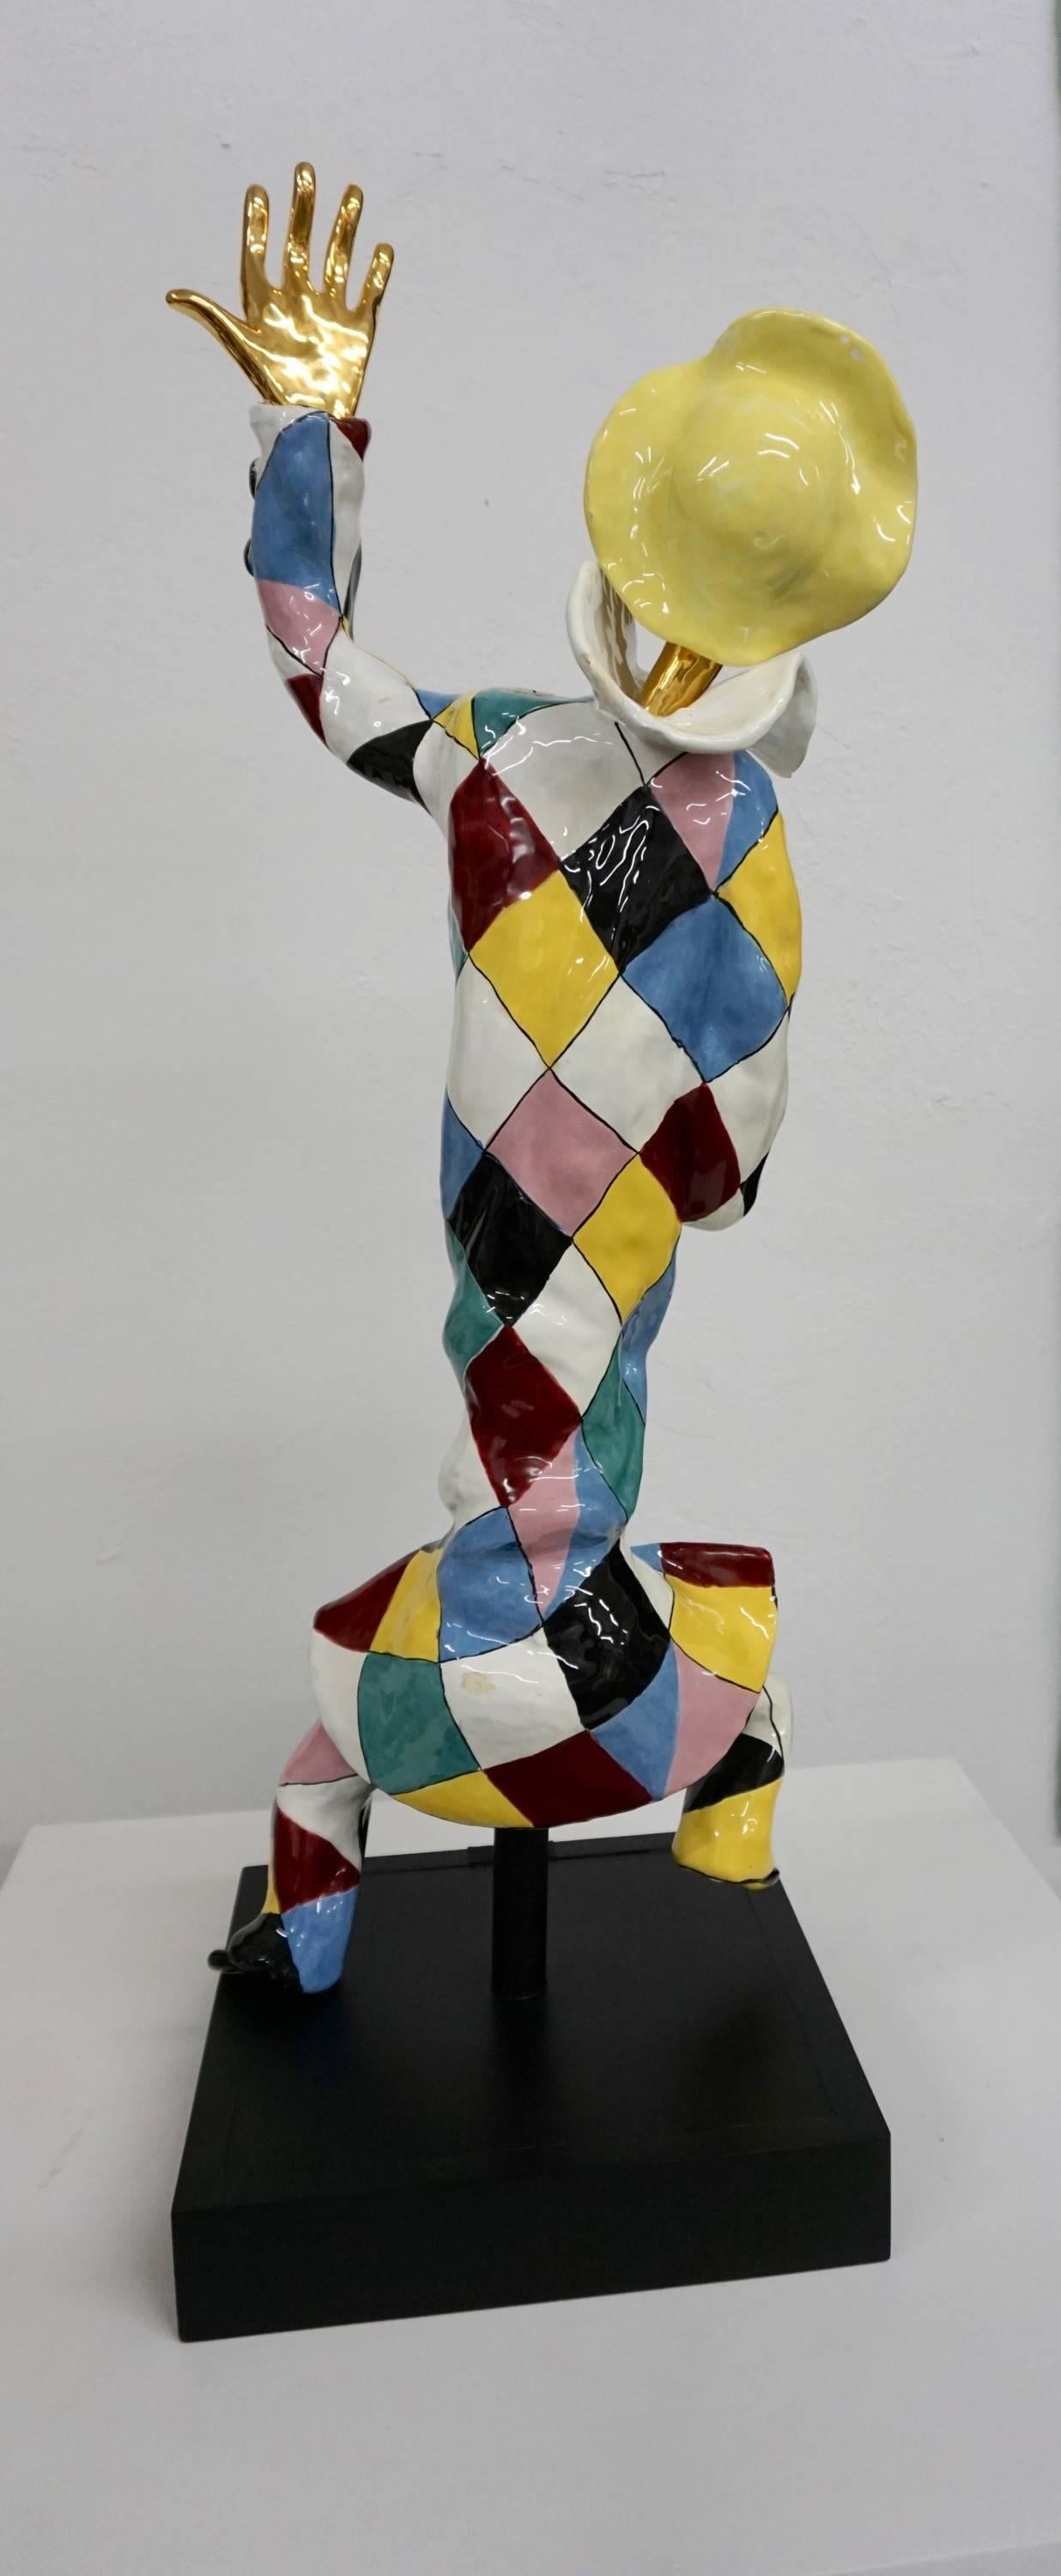 Mid-Century Modern Harlequin Jester Sculpture by San Polo Ceramics, Italy